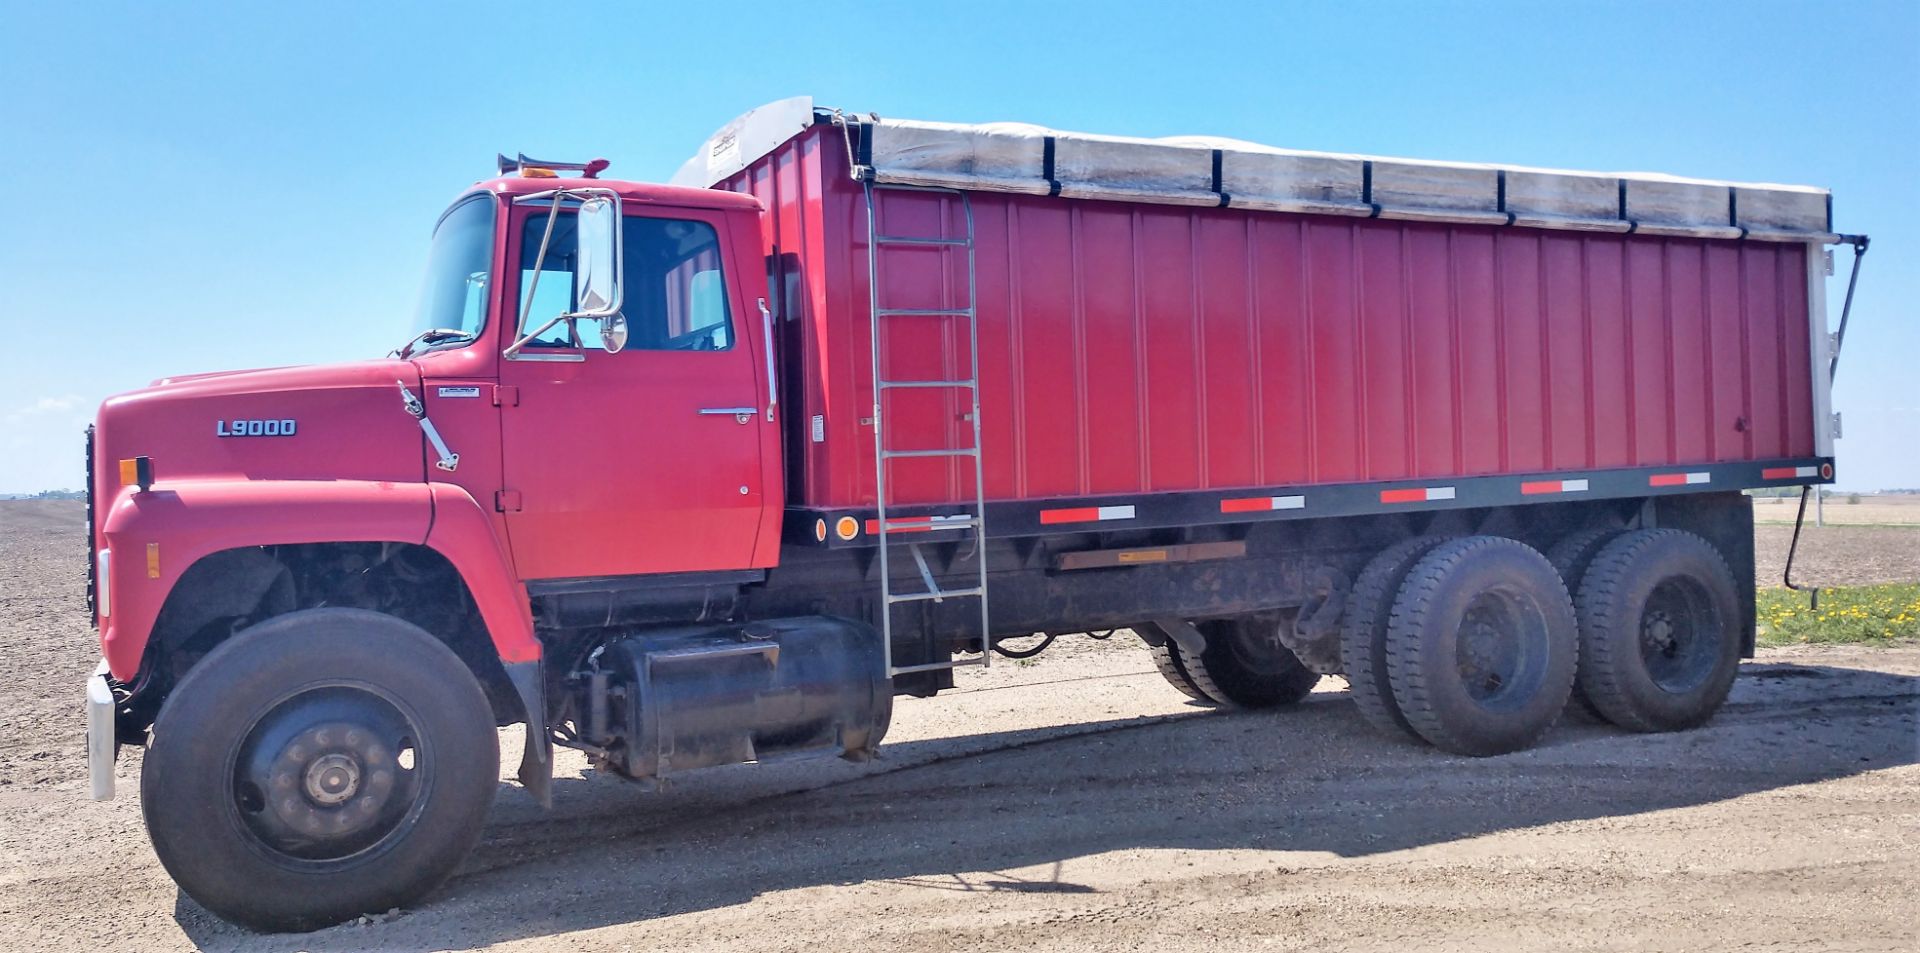 1988 Ford L9000 Twin Screw Grain Truck With L10 Cummins Motor And 9 Speed Transmission – 20 Foot